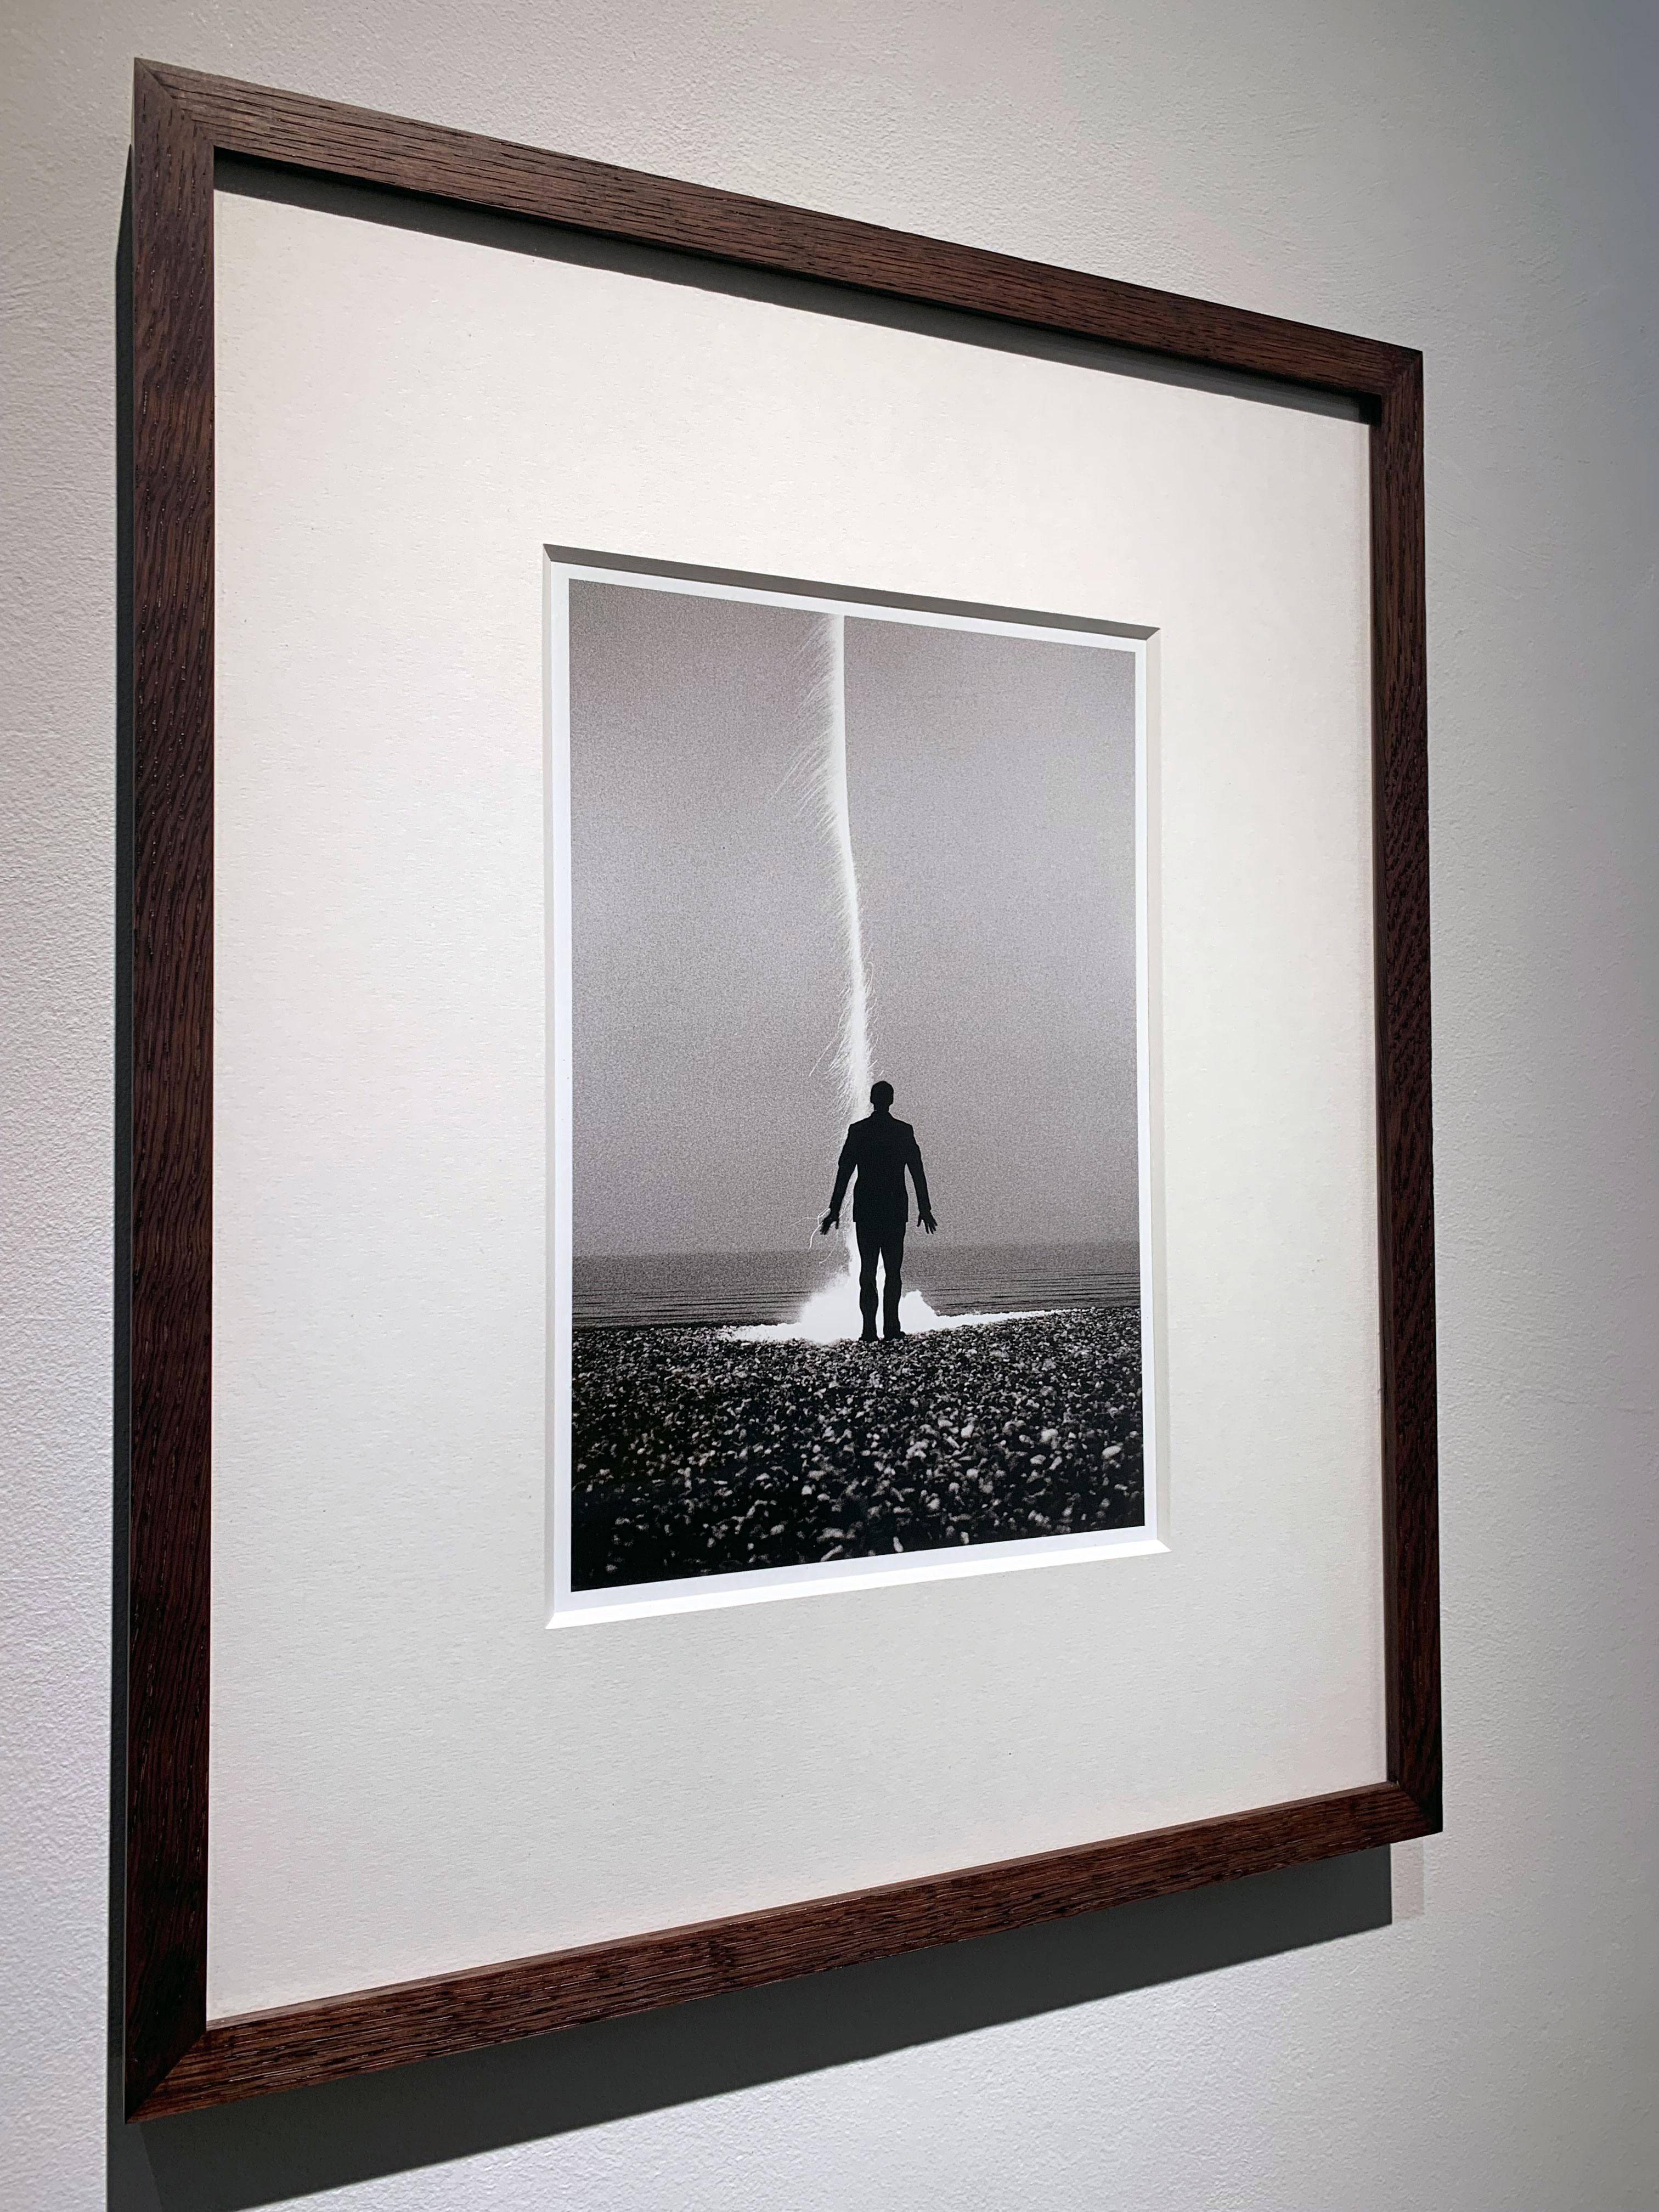 Rocket Man, Dungeness, Kent, 1979 / Howard Jones - Crossed That Line 1989 - Brown Figurative Photograph by Brian Griffin